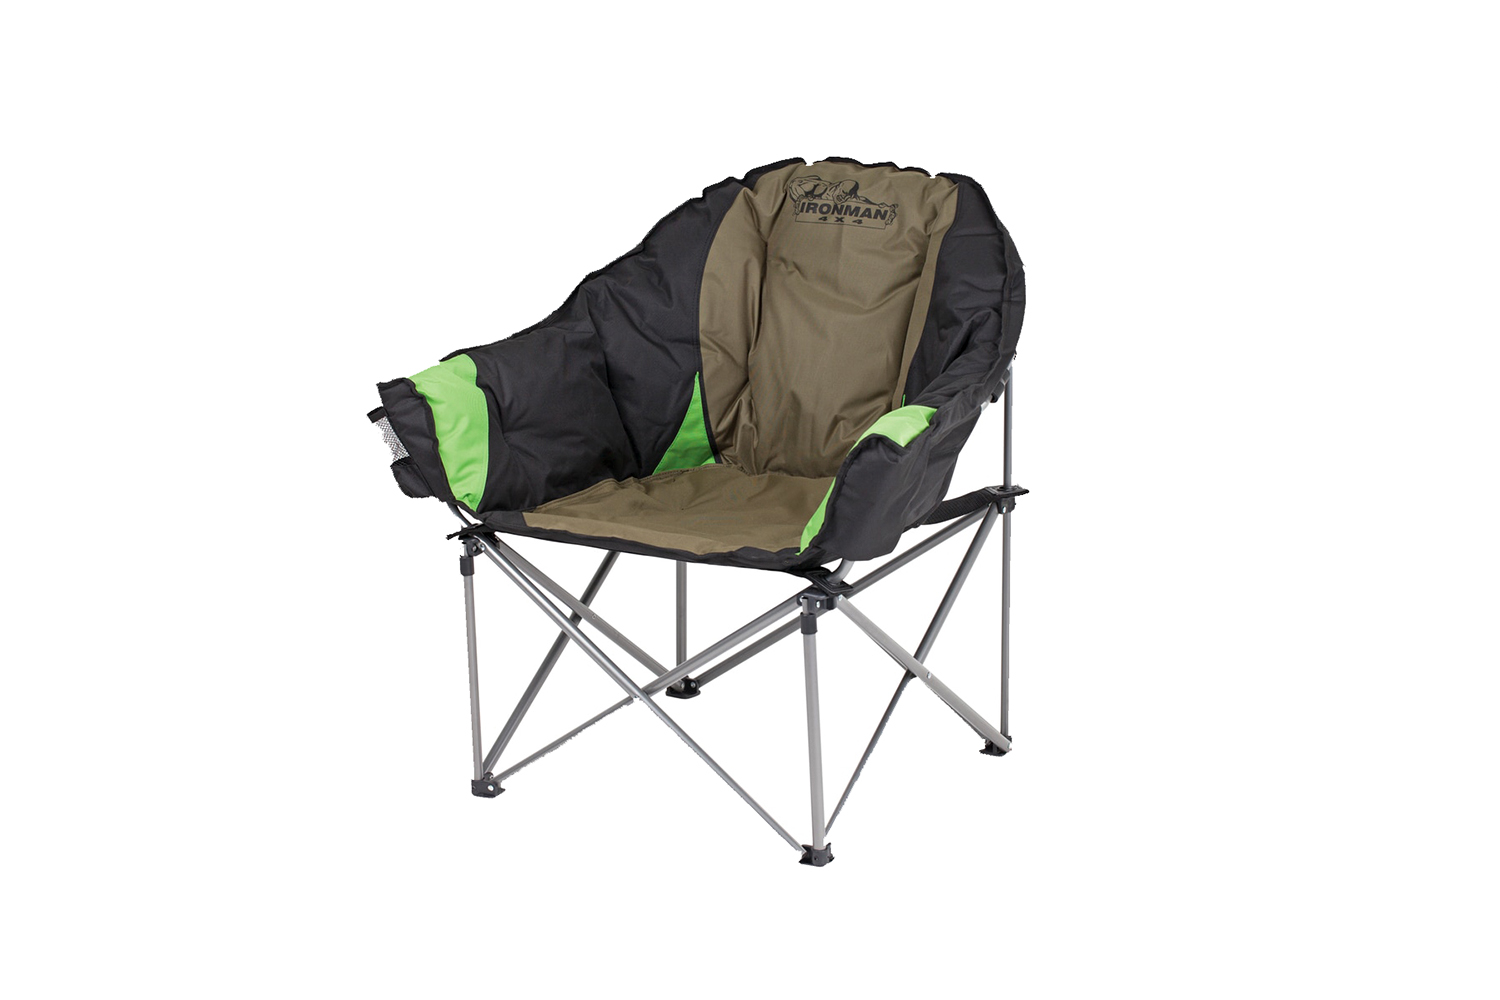 Deluxe Lounge Camp Chair Questions & Answers